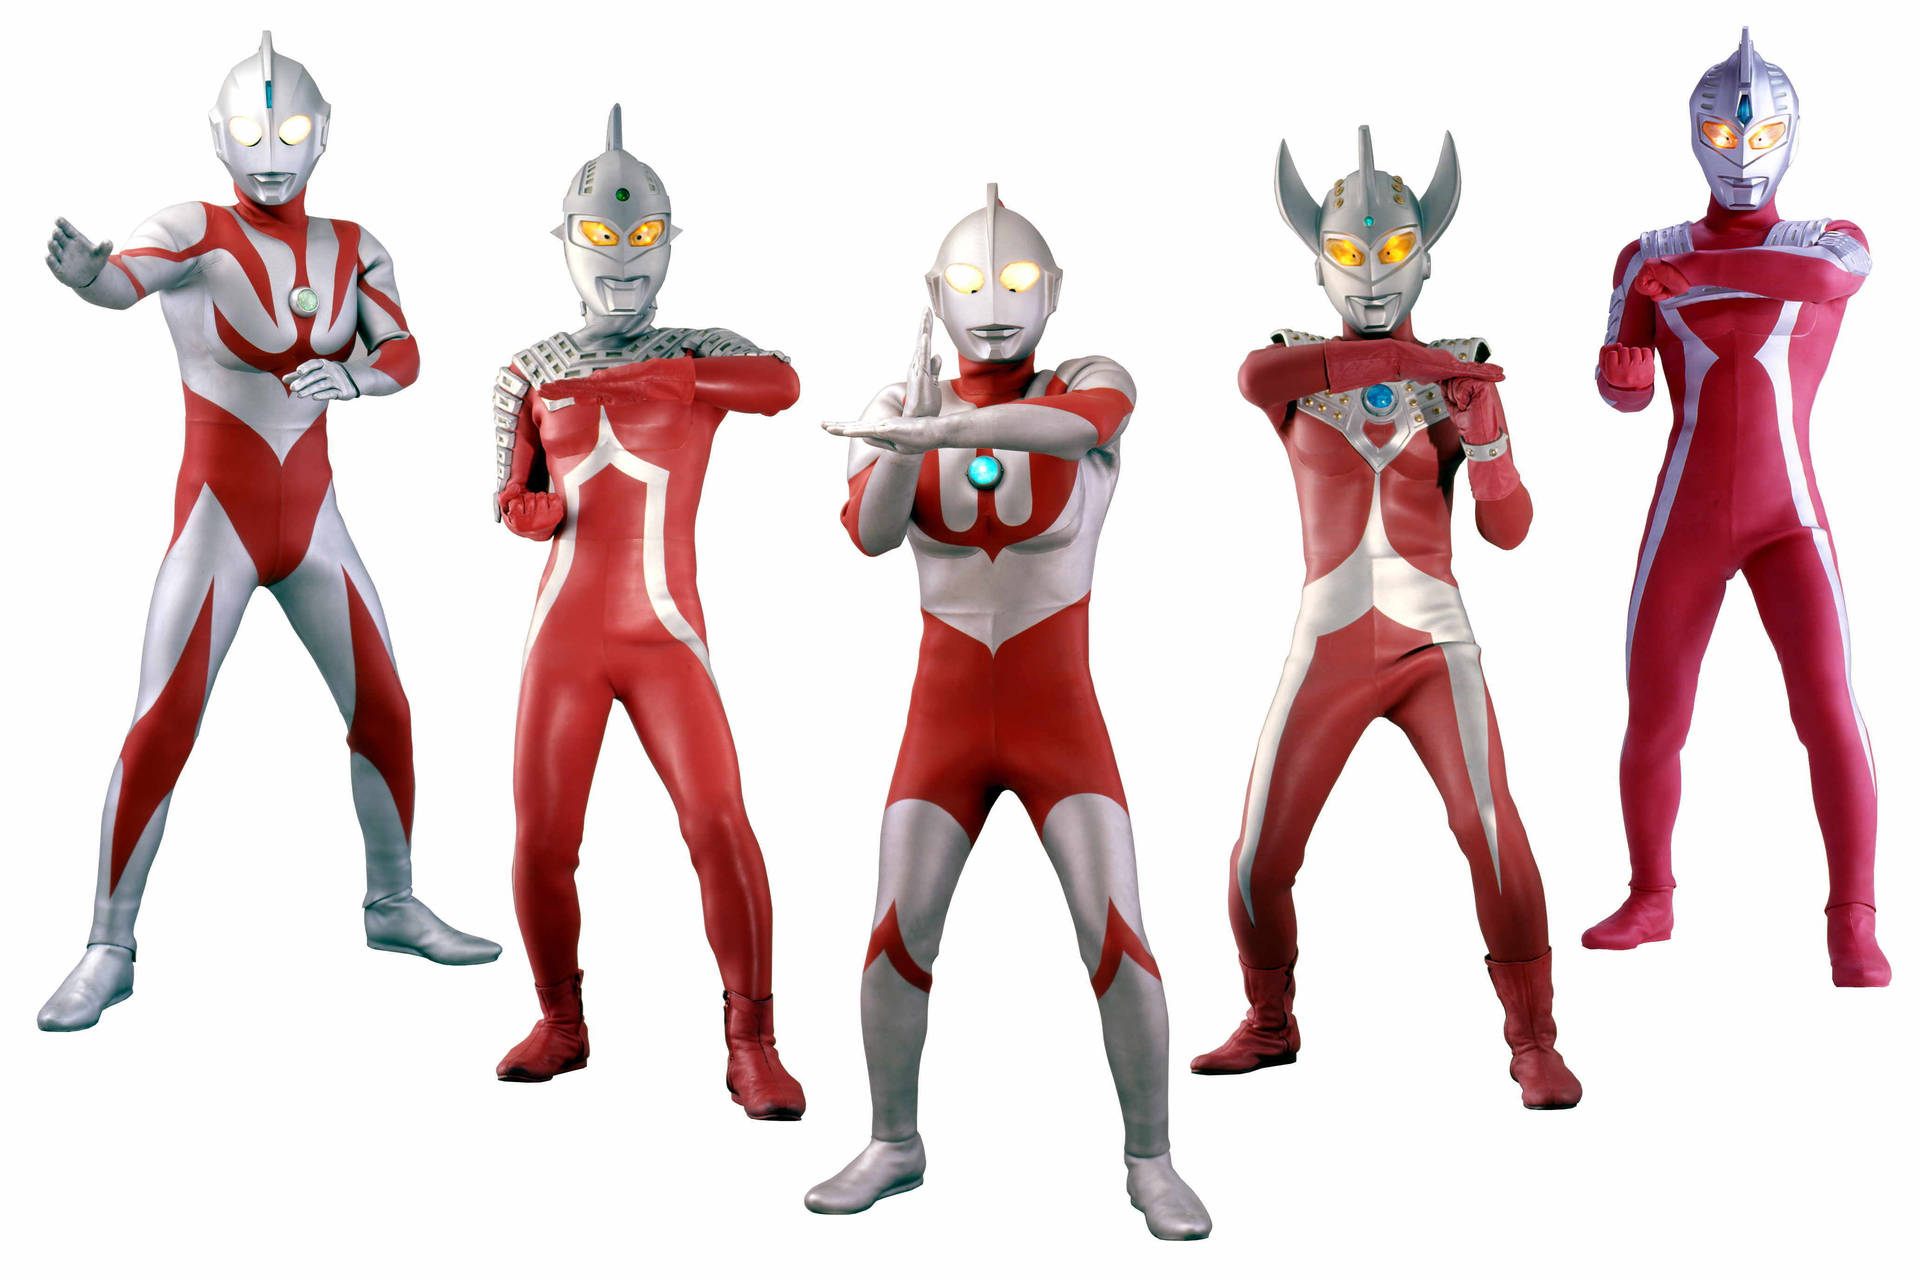 Caption: Ultraman In High Definition Standing Tall On A White Background